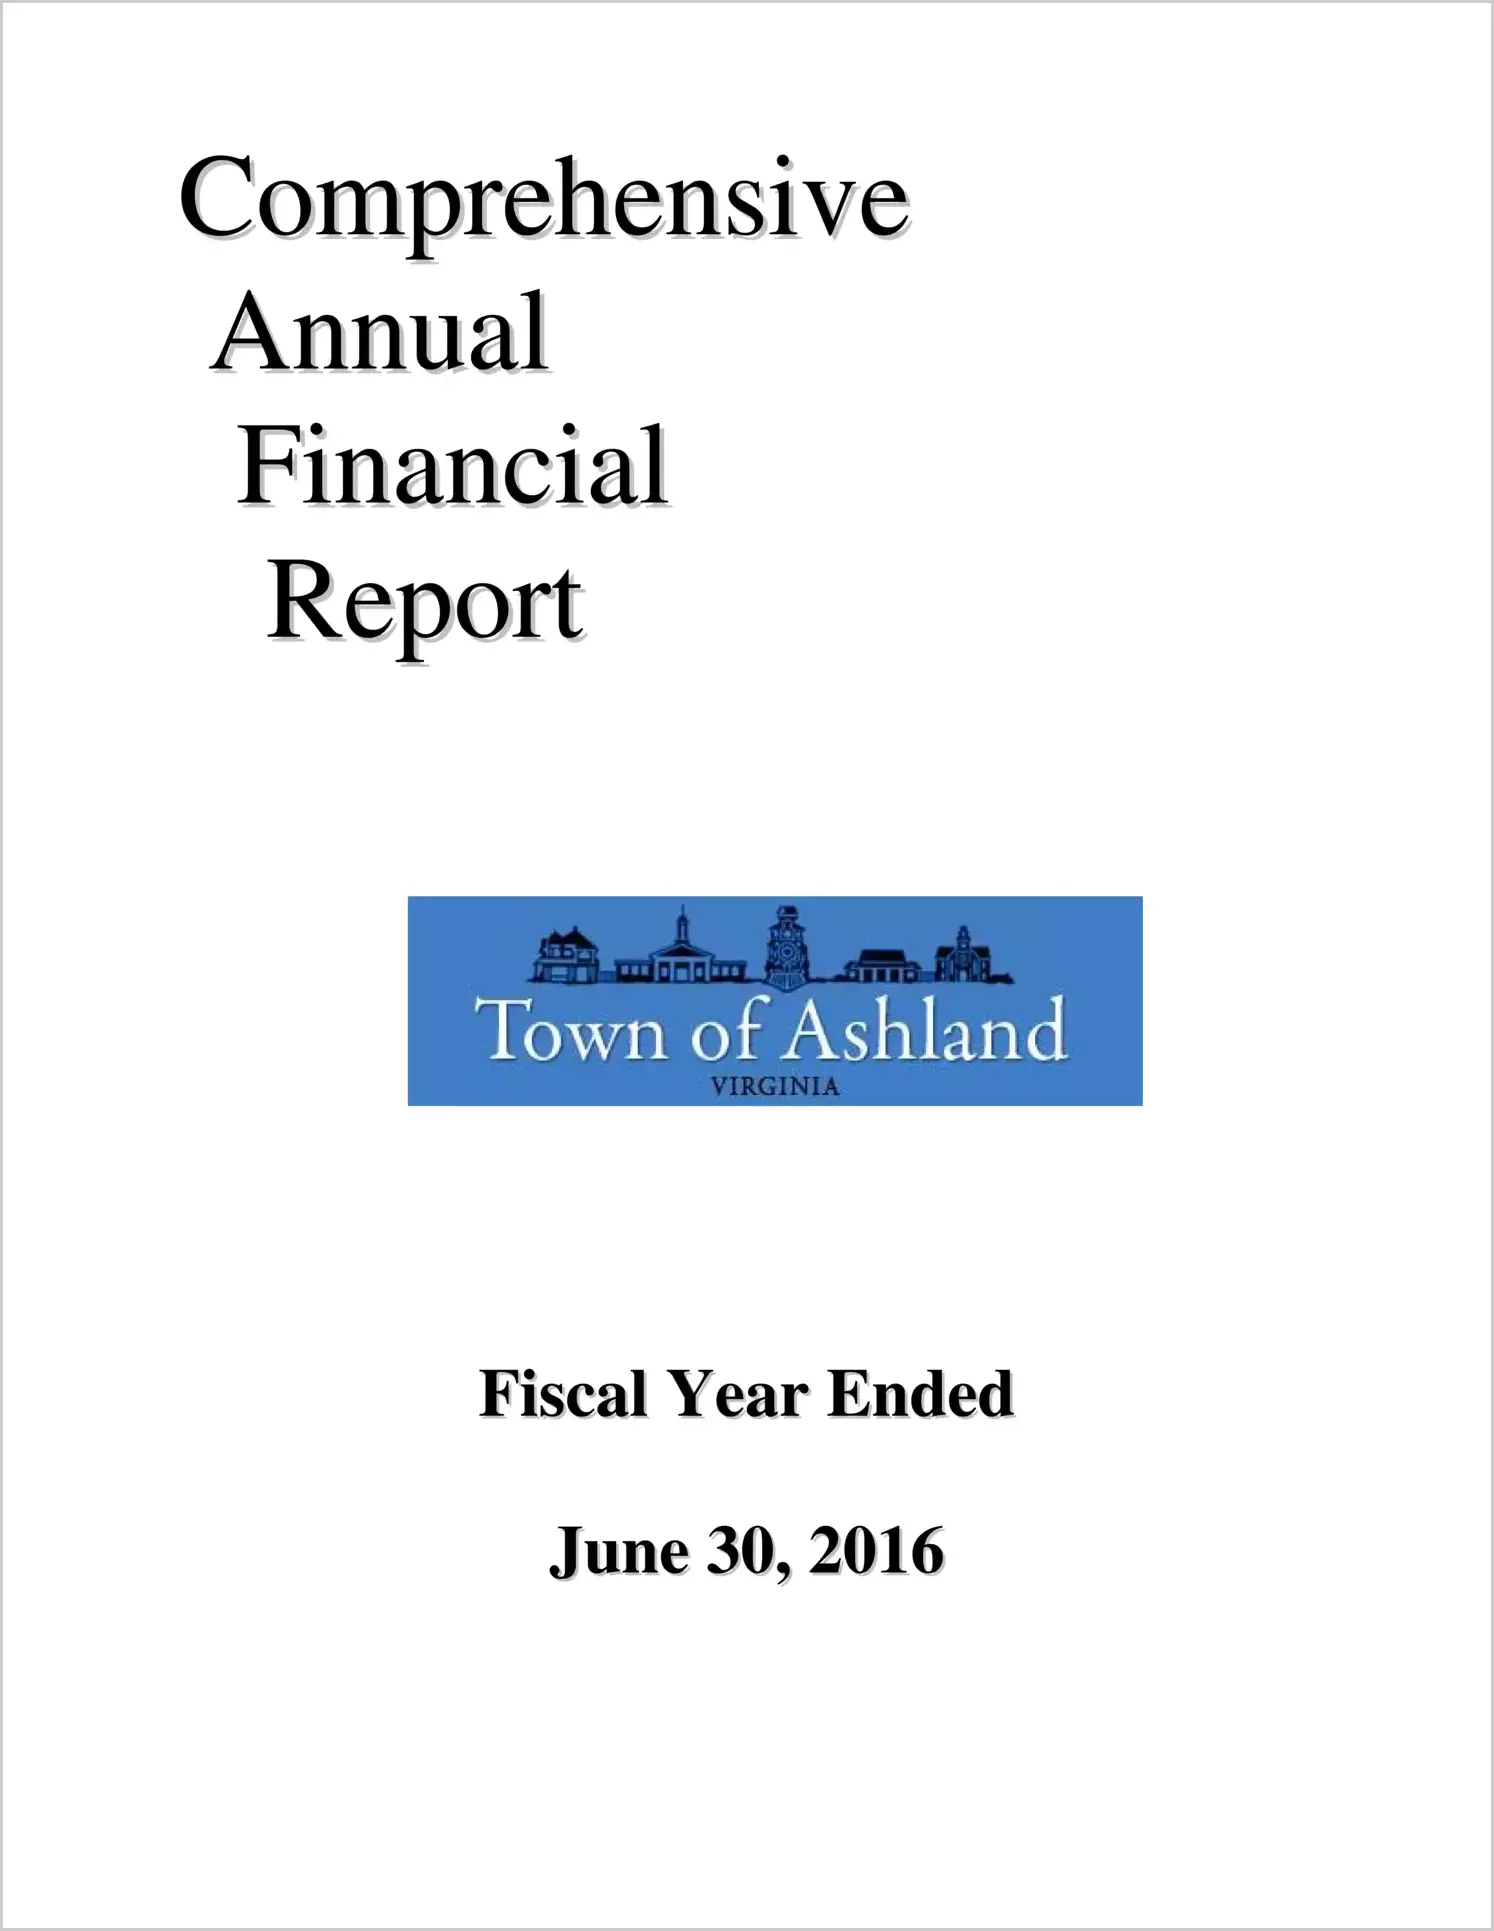 2016 Annual Financial Report for Town of Ashland